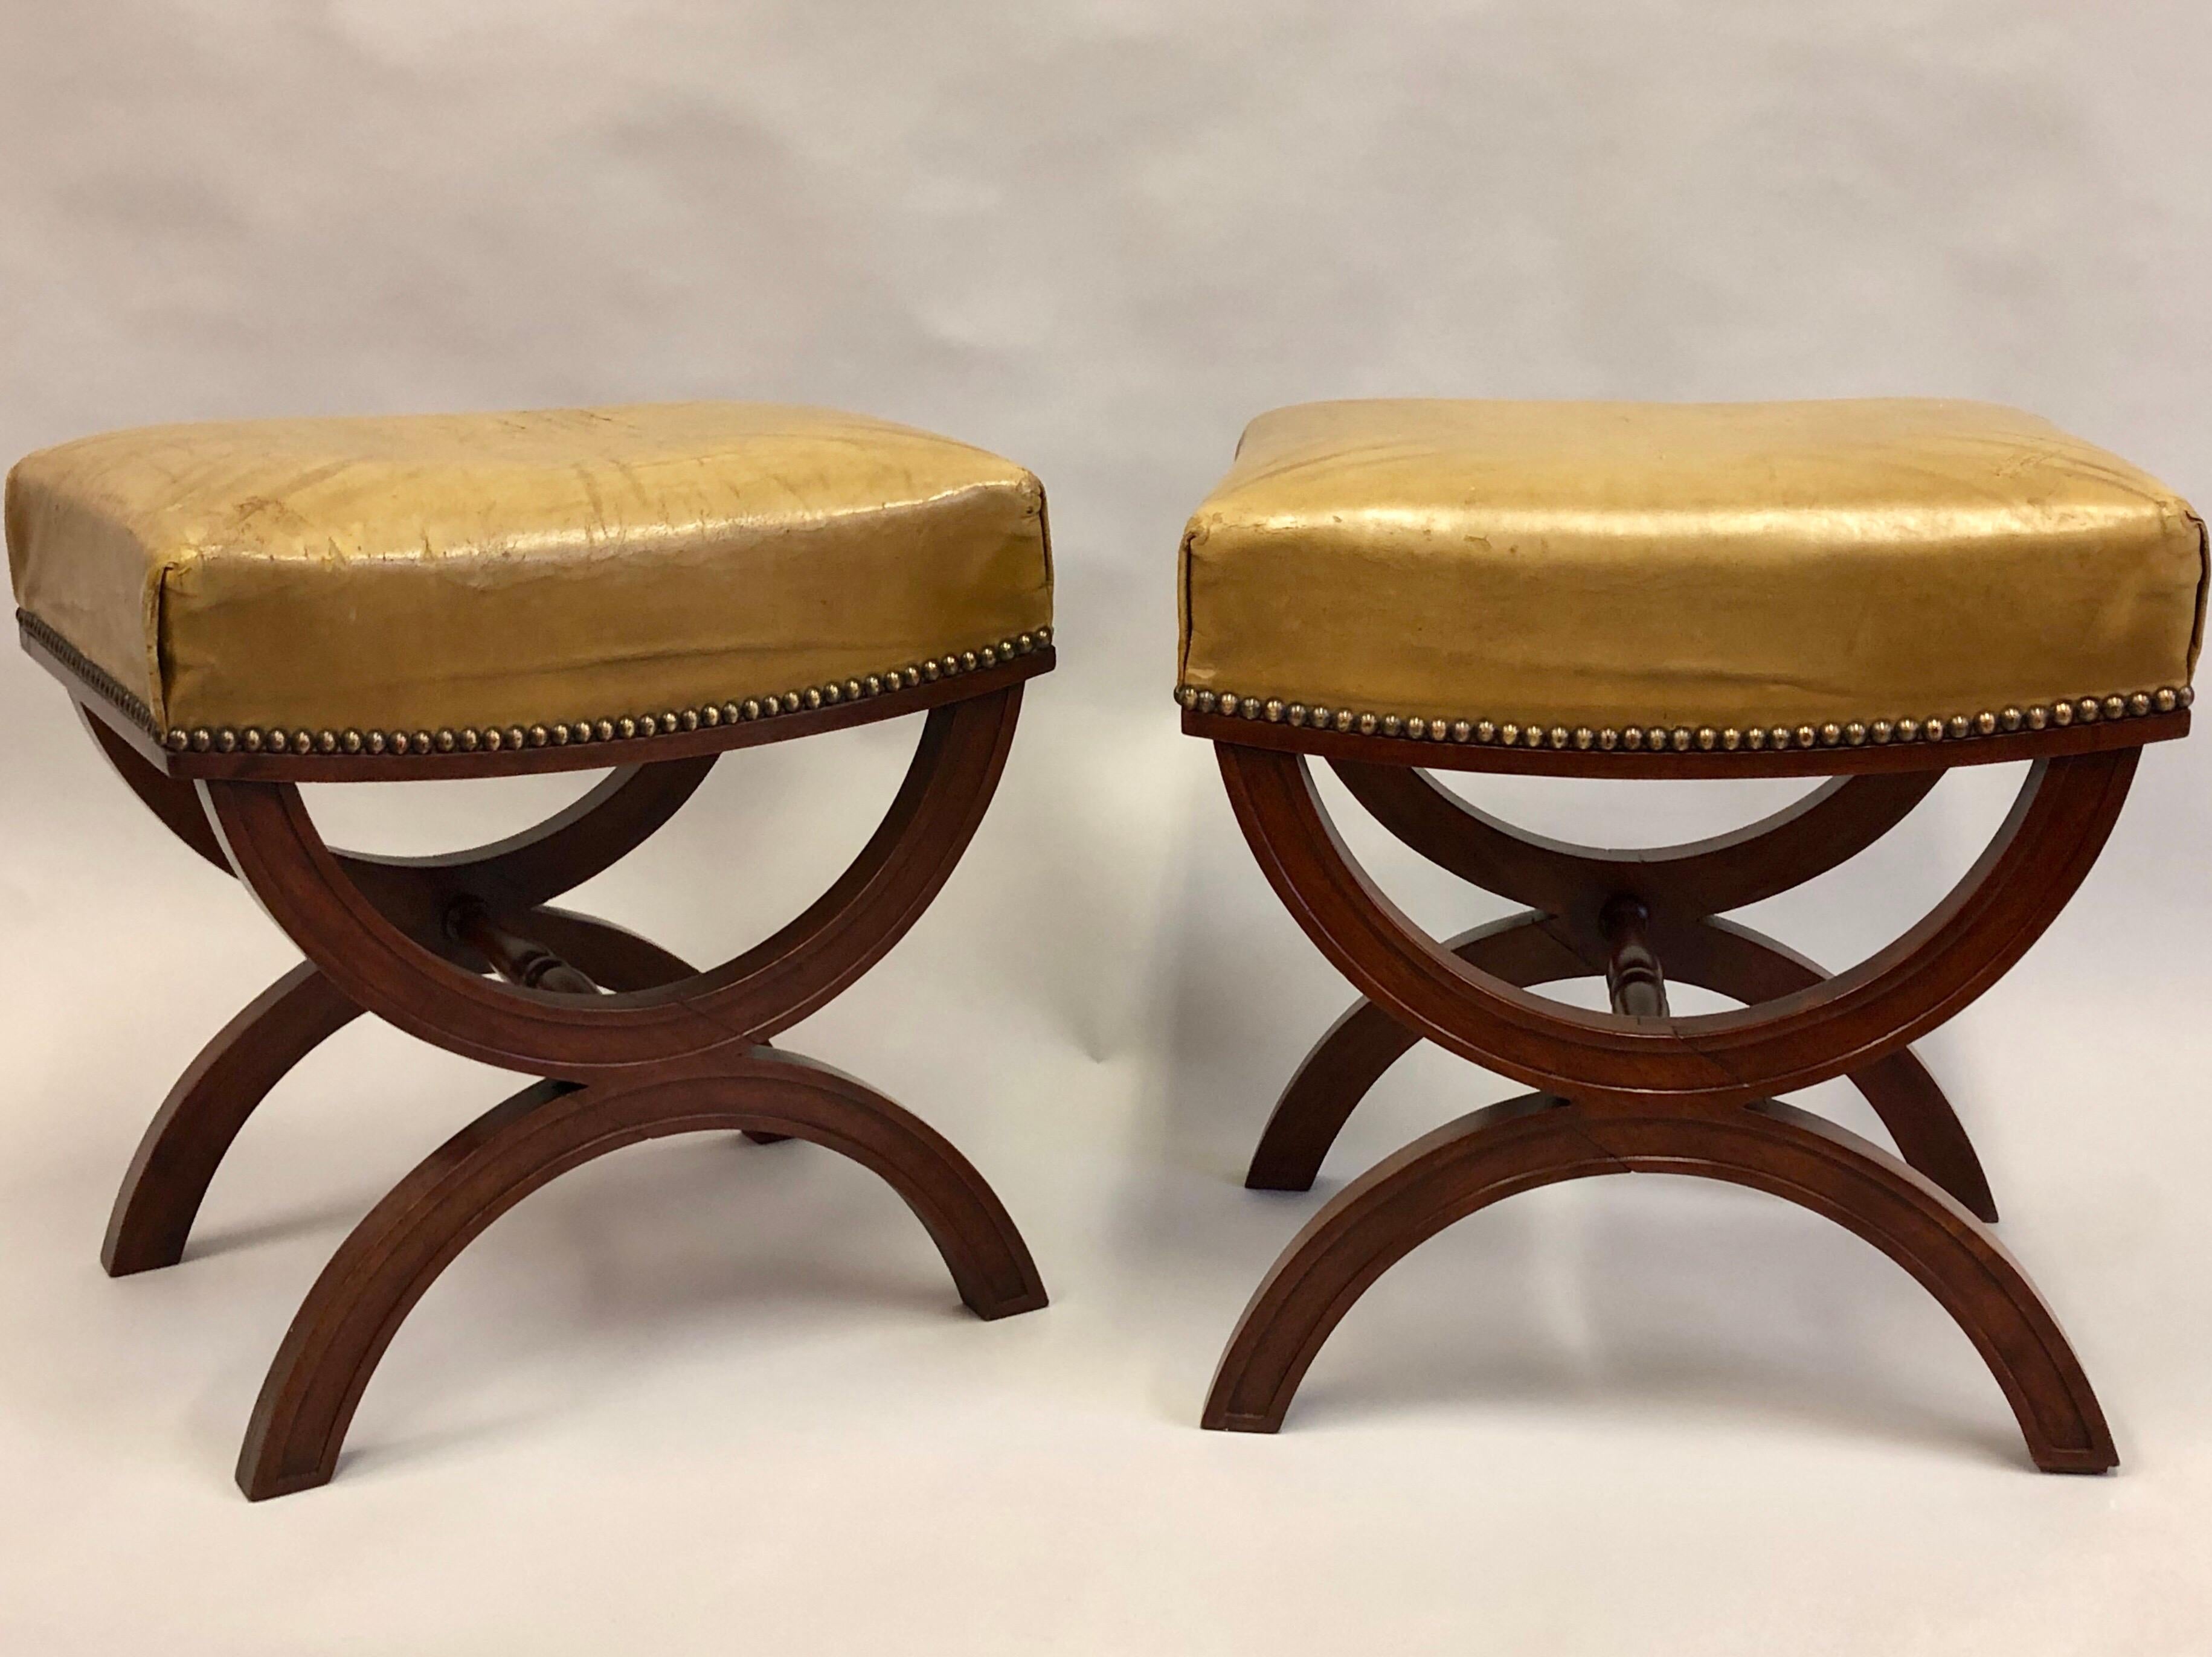 Elegant, timeless pair of French Mid-Century Modern neoclassical mahogany and leather benches or stools attributed to Andre Arbus, circa 1930. The pieces feature Classic X-frame leg structure and are delicately channelled to provide sober detailing.